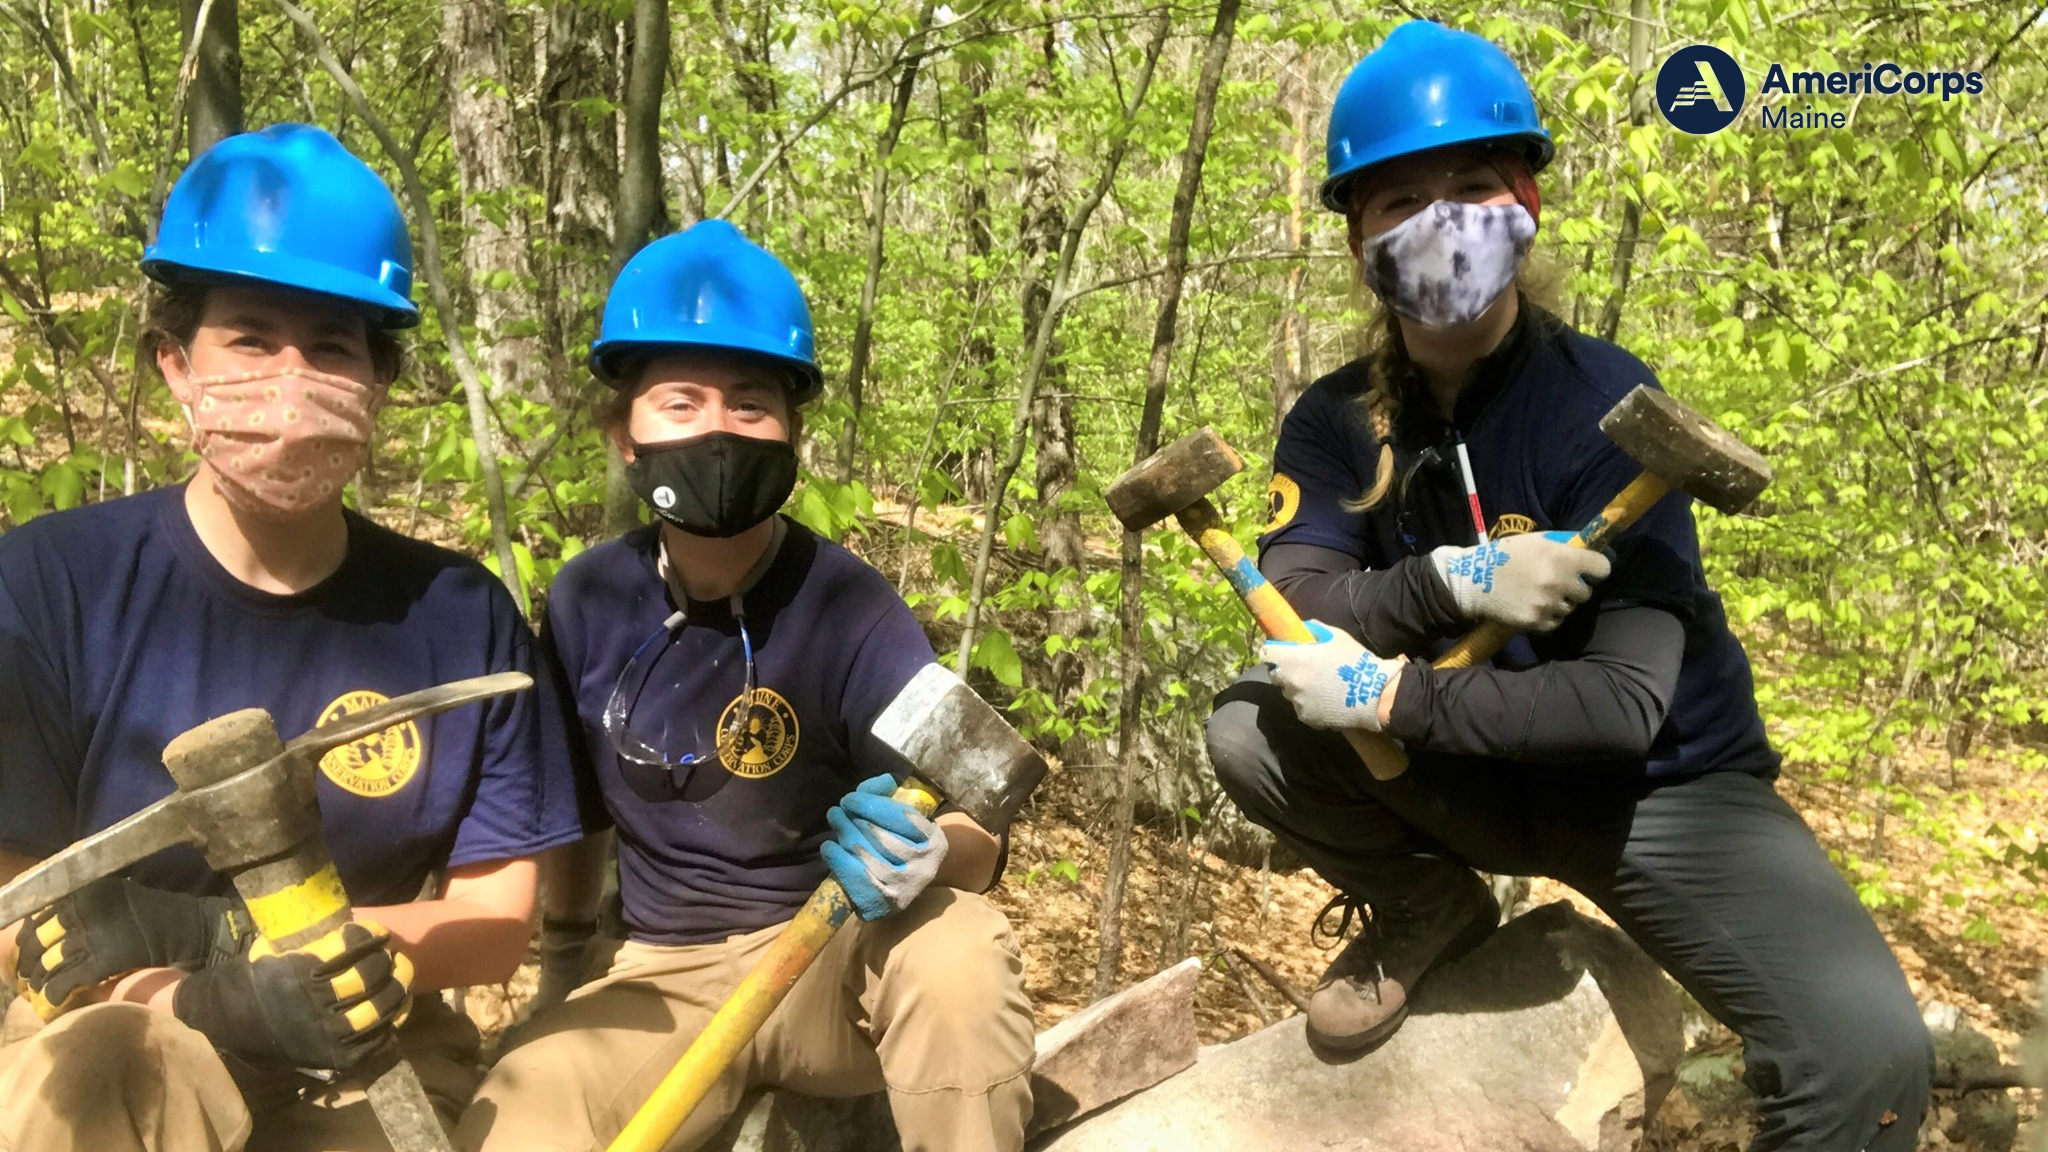 Three individuals pose in the woods with trail maintenance gear and equipment